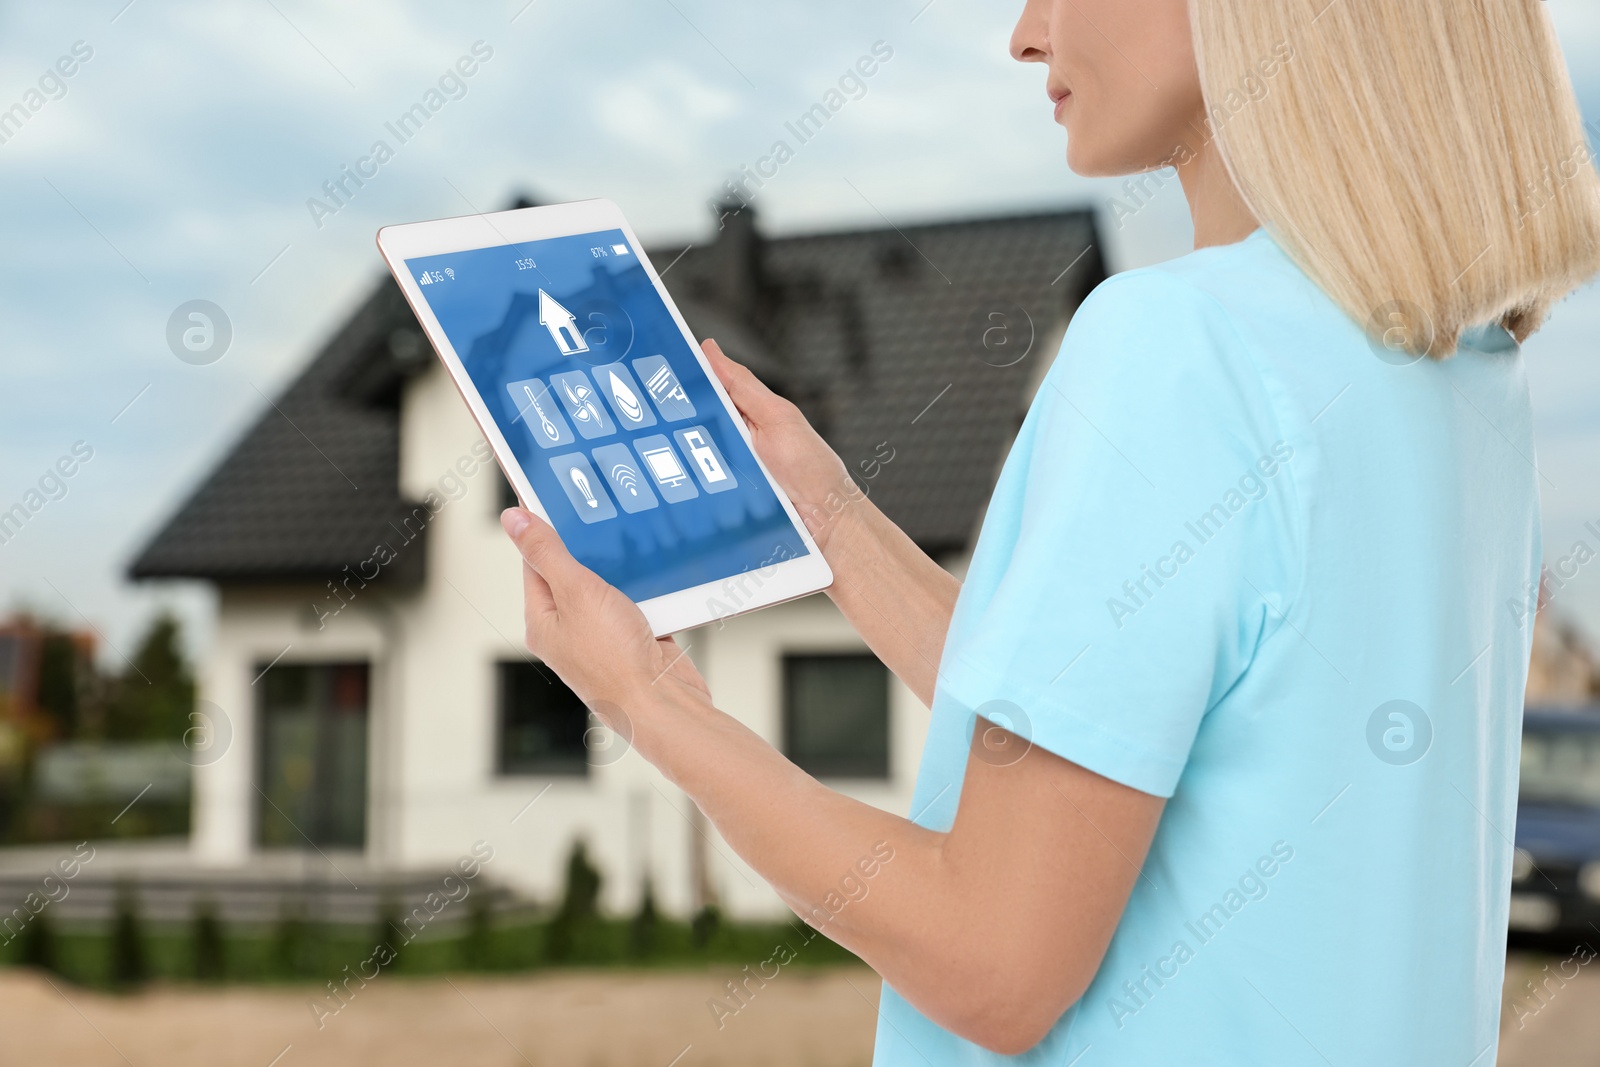 Image of Woman using smart home control system via tablet near house outdoors, closeup